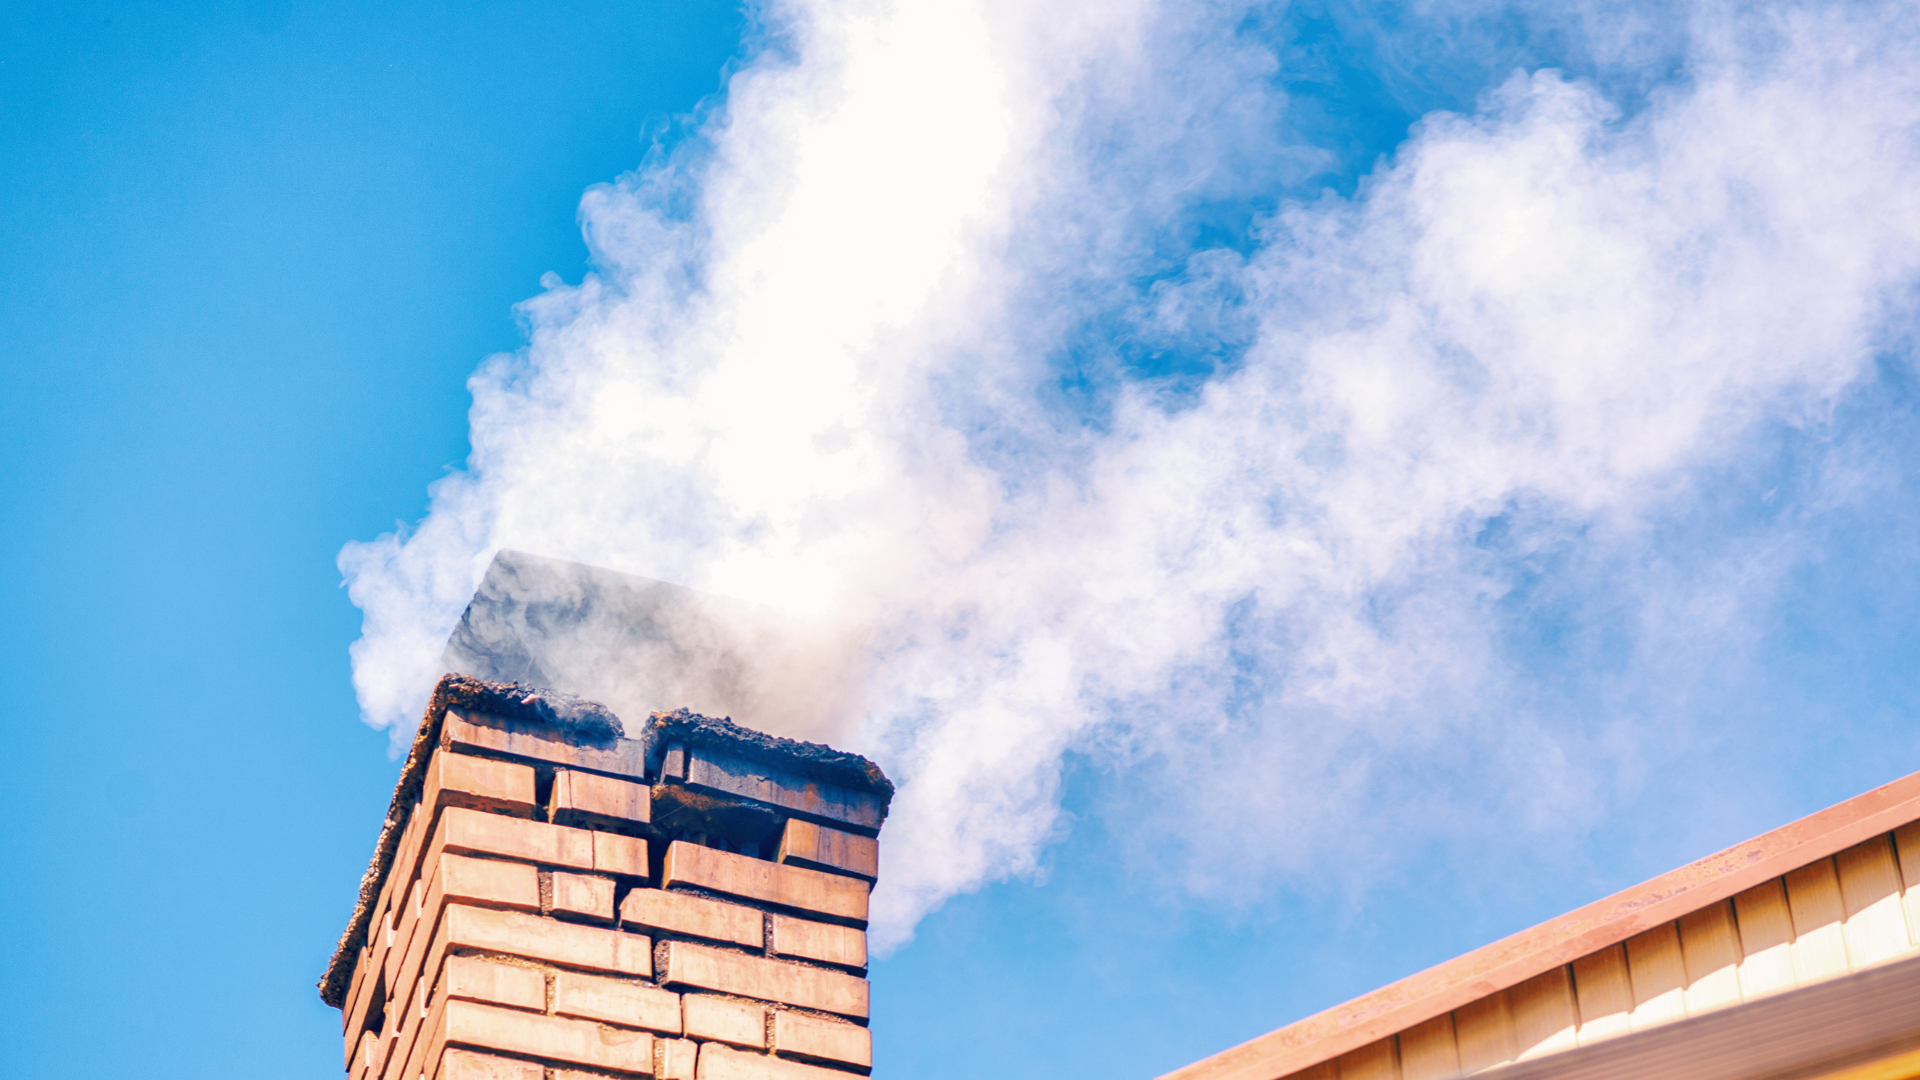 Criteria for Selecting the Best Chimney Companies